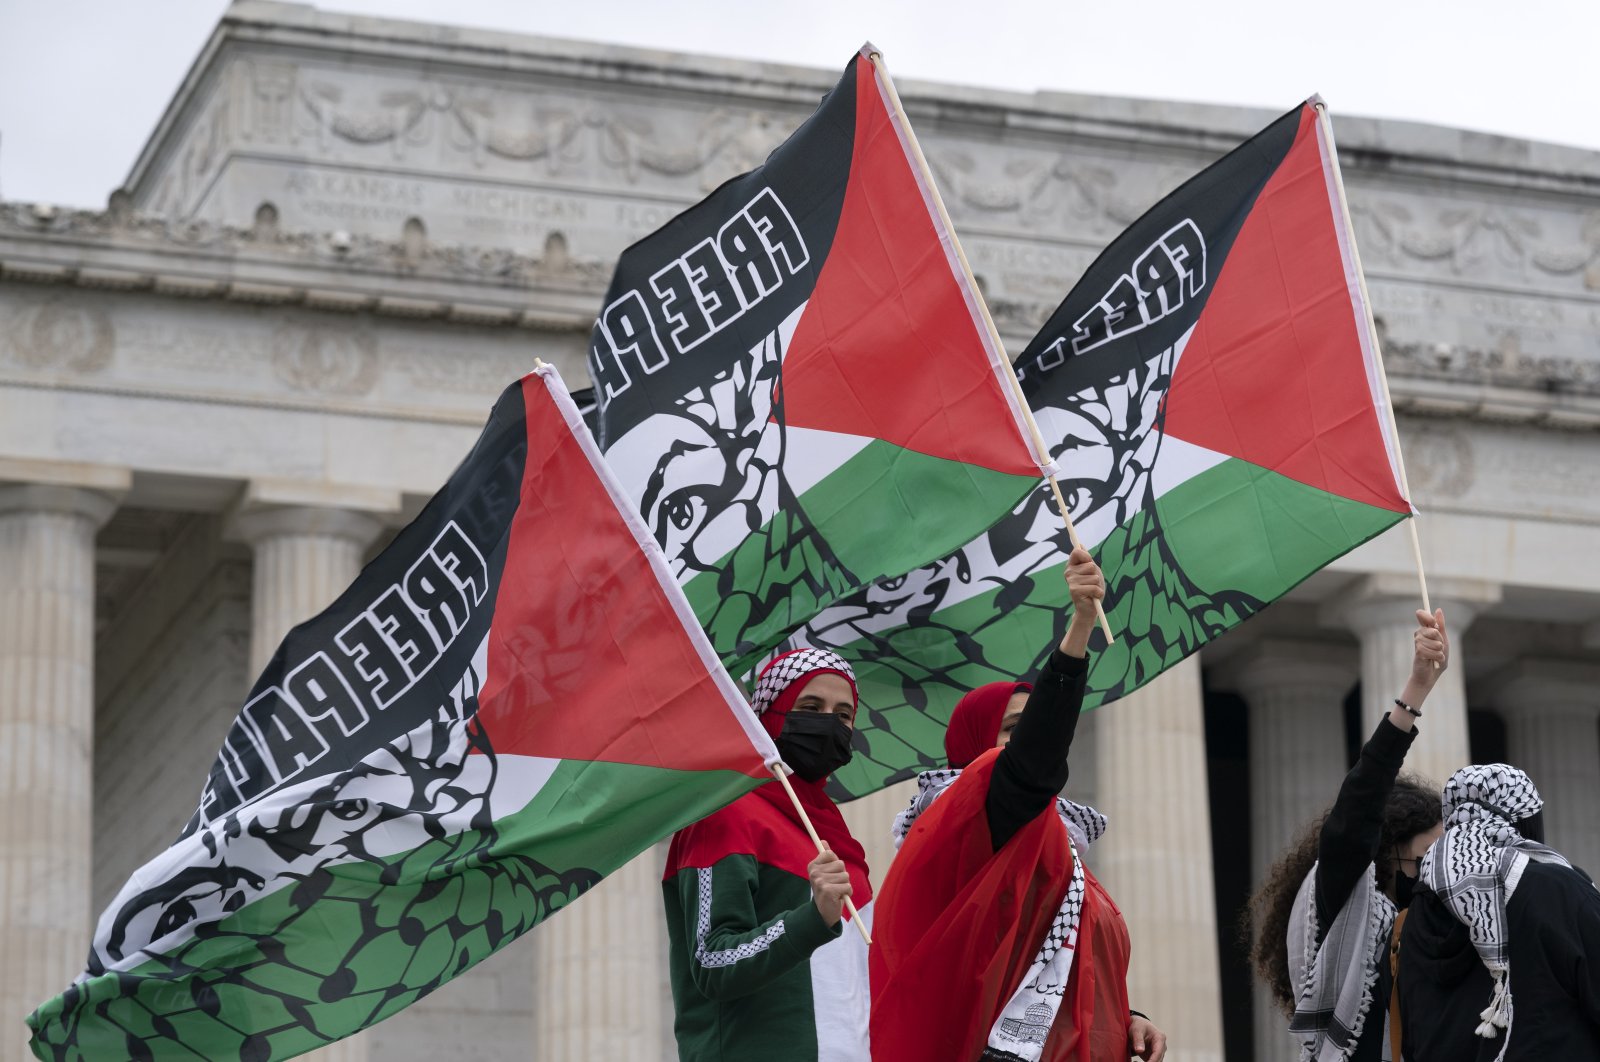 Supporters of the Palestinians rally during the "National March for Palestine" demonstration at Lincoln Memorial, Washington, D.C., the U.S., Saturday, May 29. 2021. (AP Photo / Jose Luis Magana)